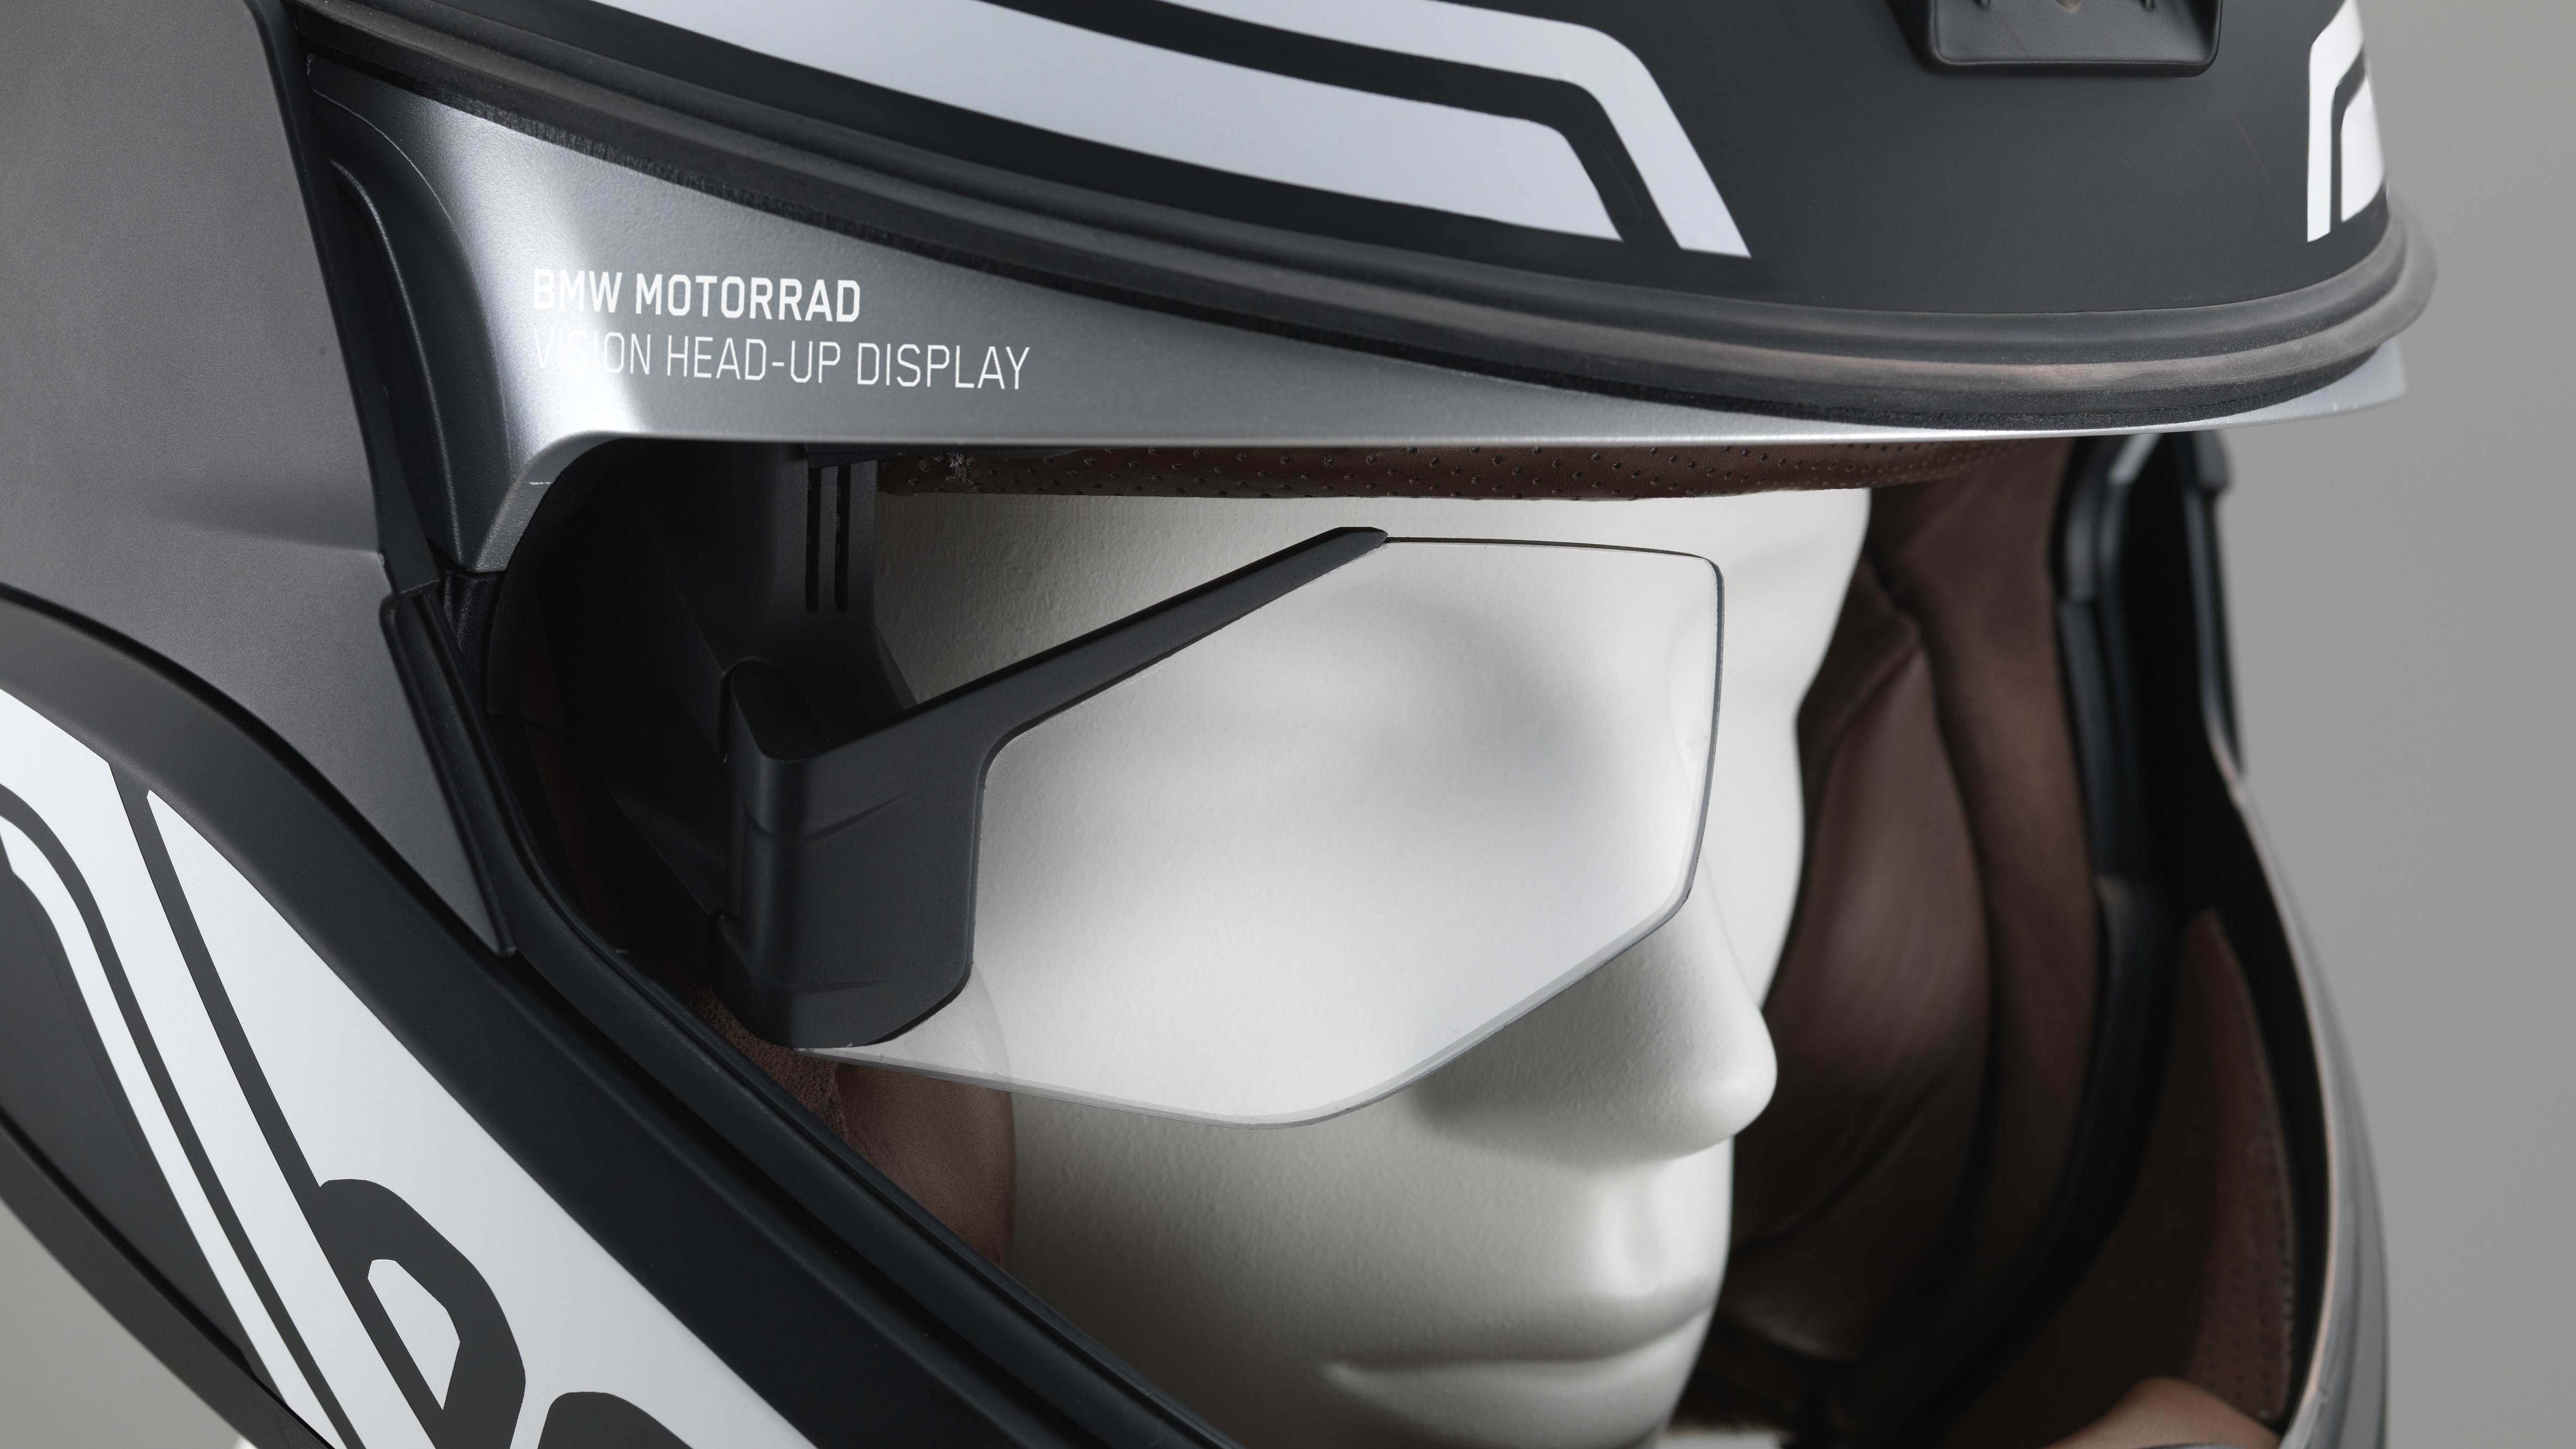 A model of the BMW Head-up helmet display system.